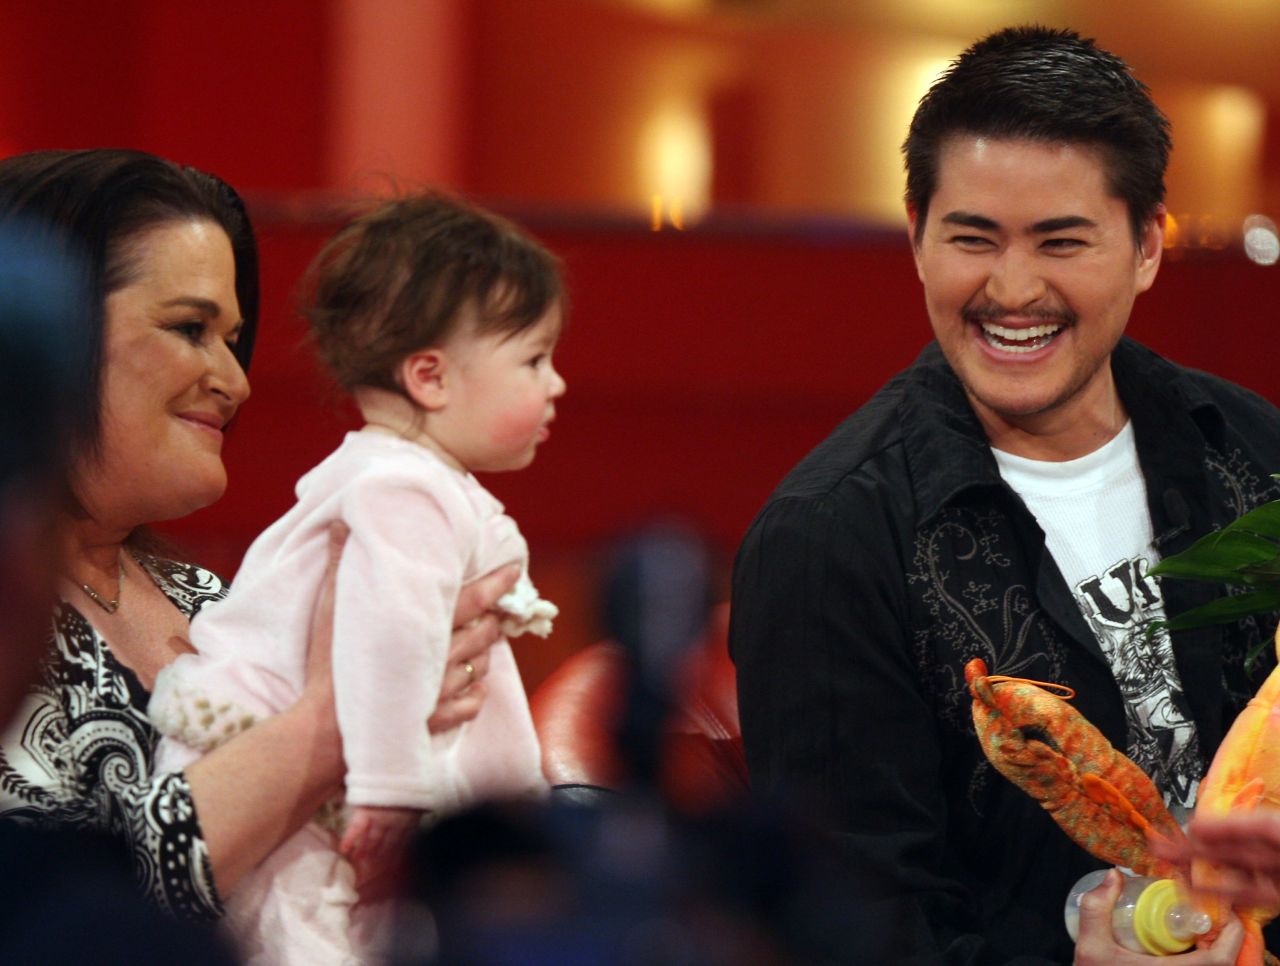 Thomas Beatie became the first transsexual man to give birth to a baby in 2008 and has subsequently had two more children. Beatie was born a woman but underwent hormone therapy before being legally declared a man. He retained his primary female sexual organs so he could one day get pregnant.